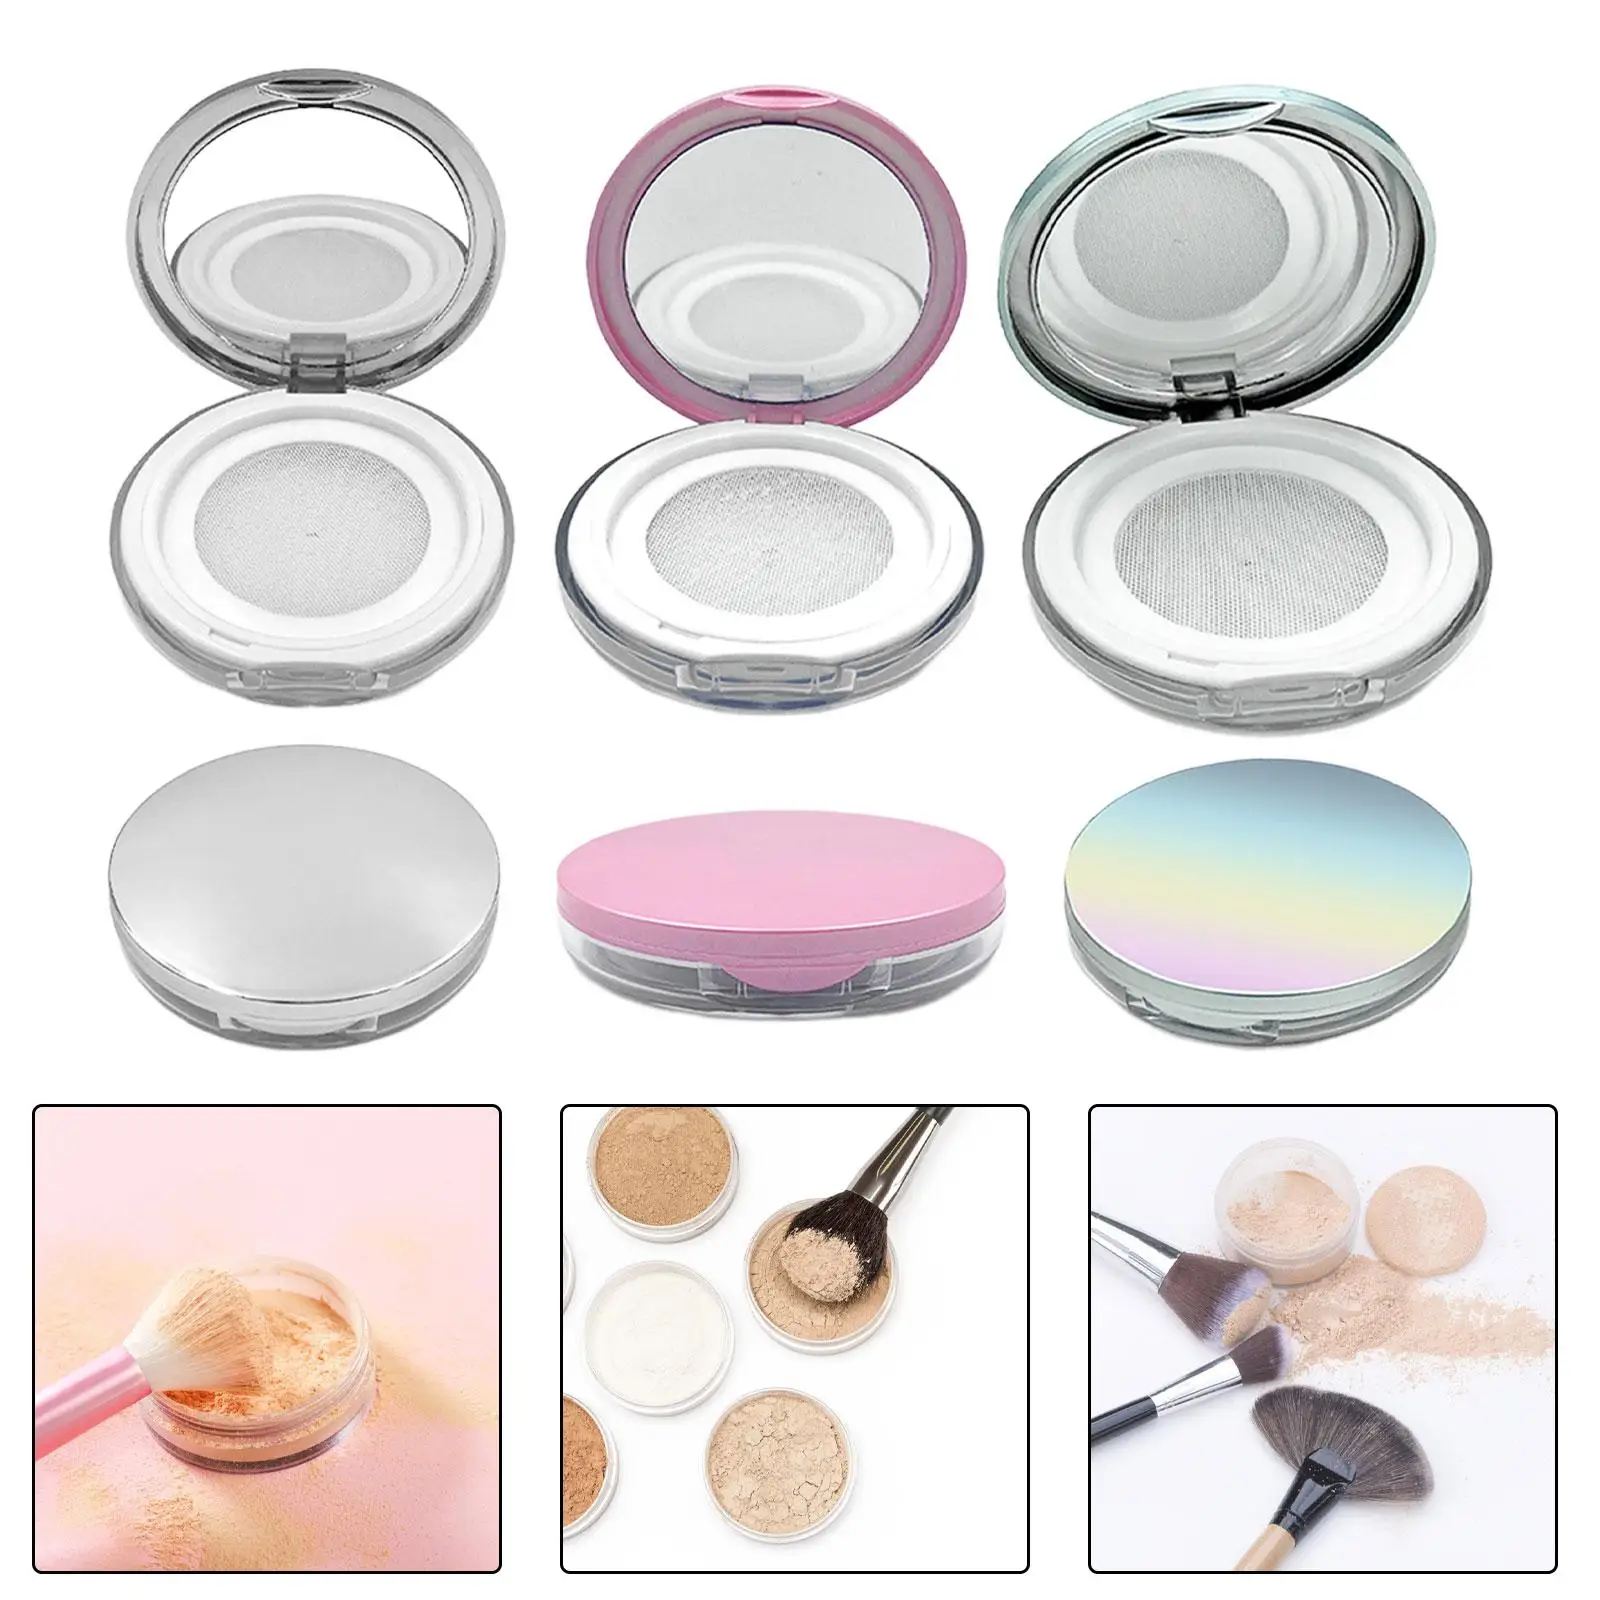 2 Pieces Makeup Loose Powder Case Container 3G Holder Accessories Mesh Screen to Keep The Powder in Place 3inchx0.6inch DIY